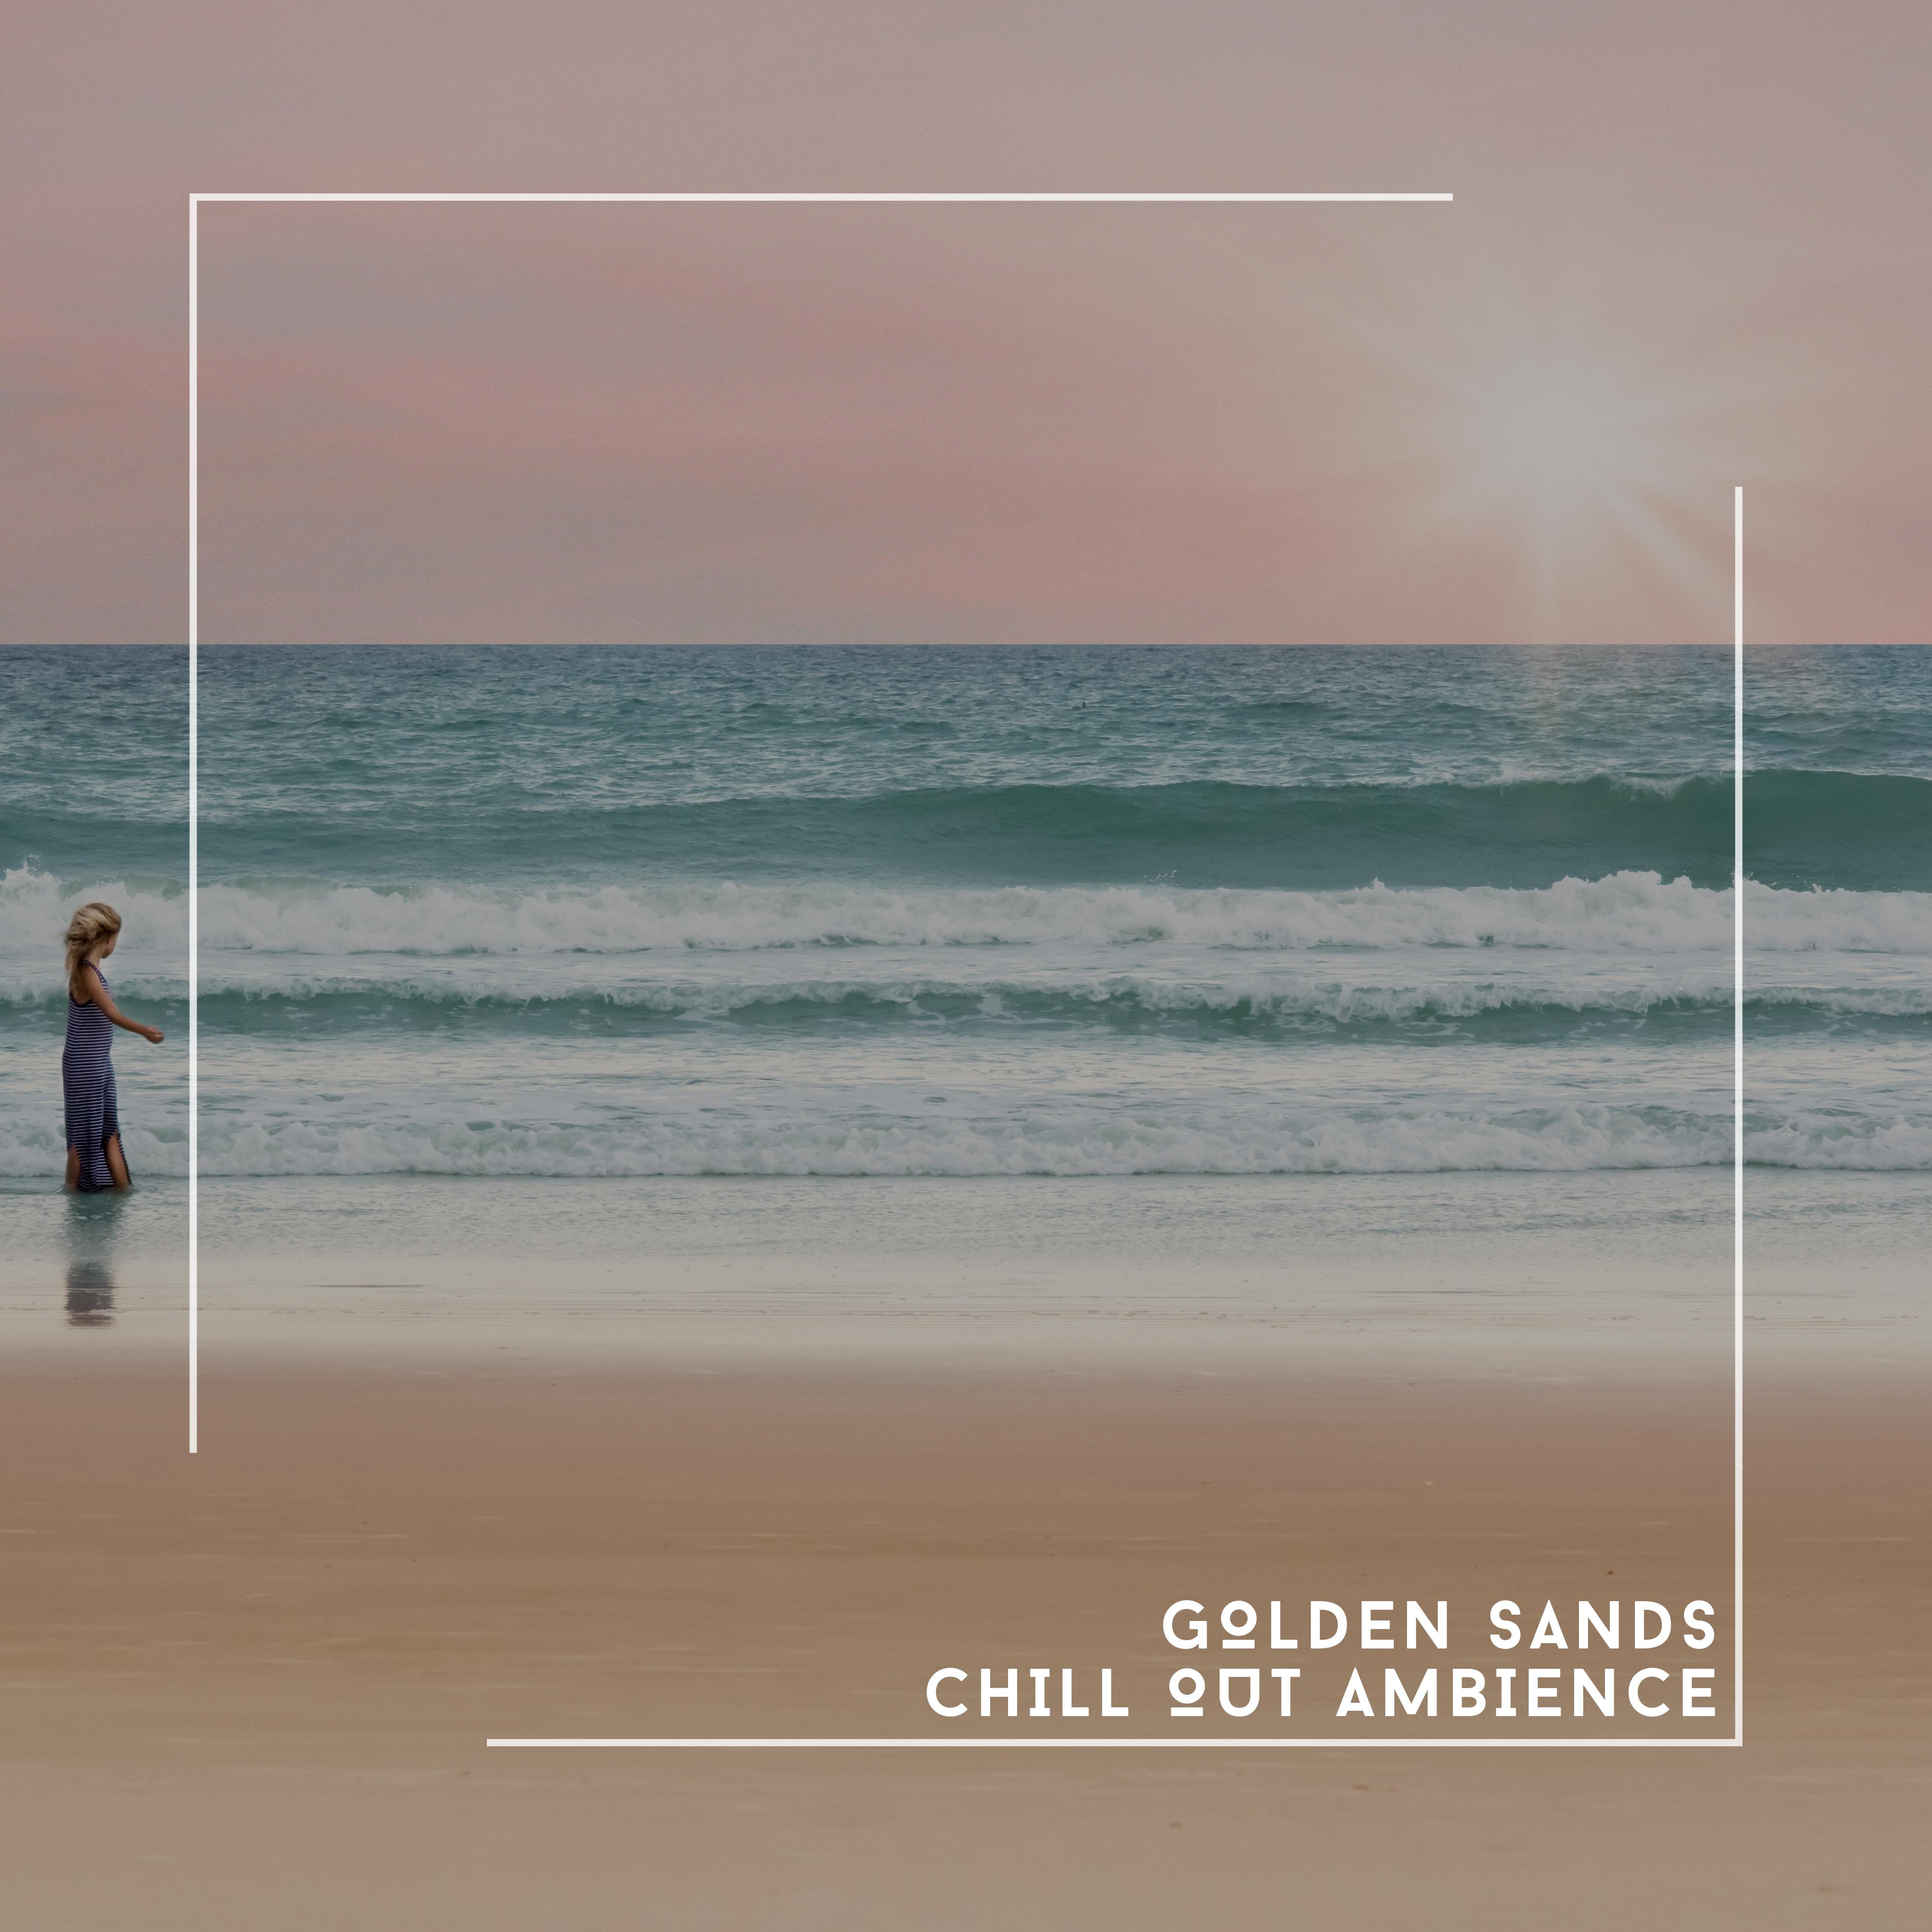 Golden Sands Chill Out Ambience